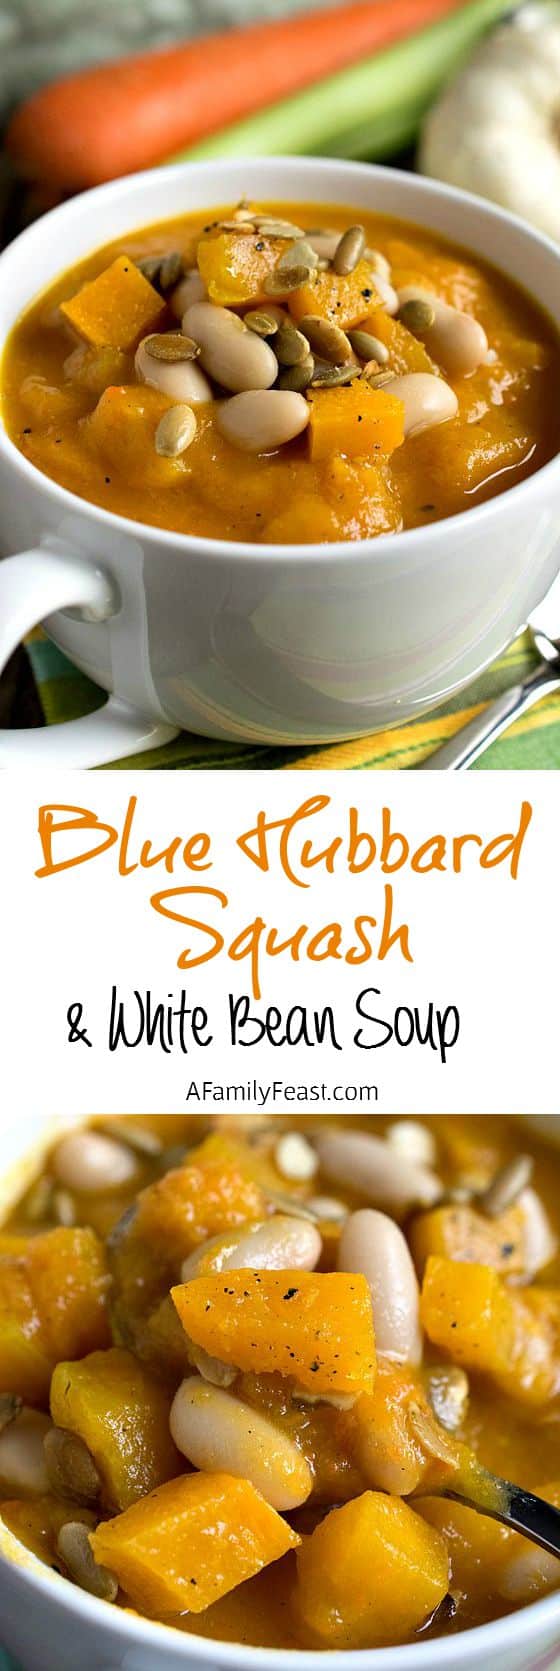 Blue Hubbard Squash and White Bean Soup - Perfect cold-weather comfort food. This soup is delicious!